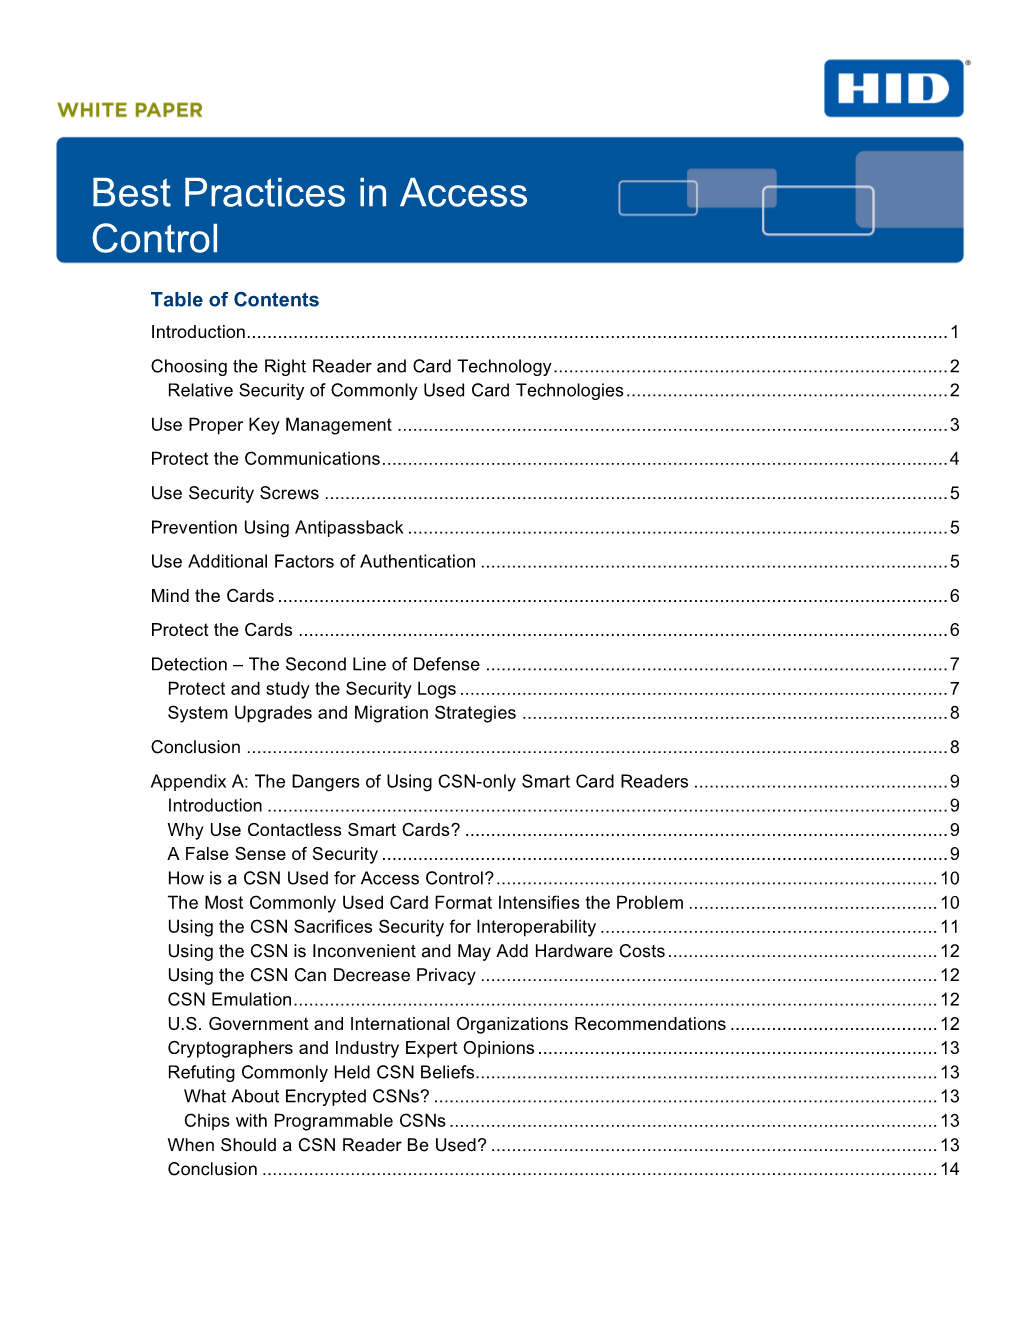 Best Practices in Access Control Whitepaper